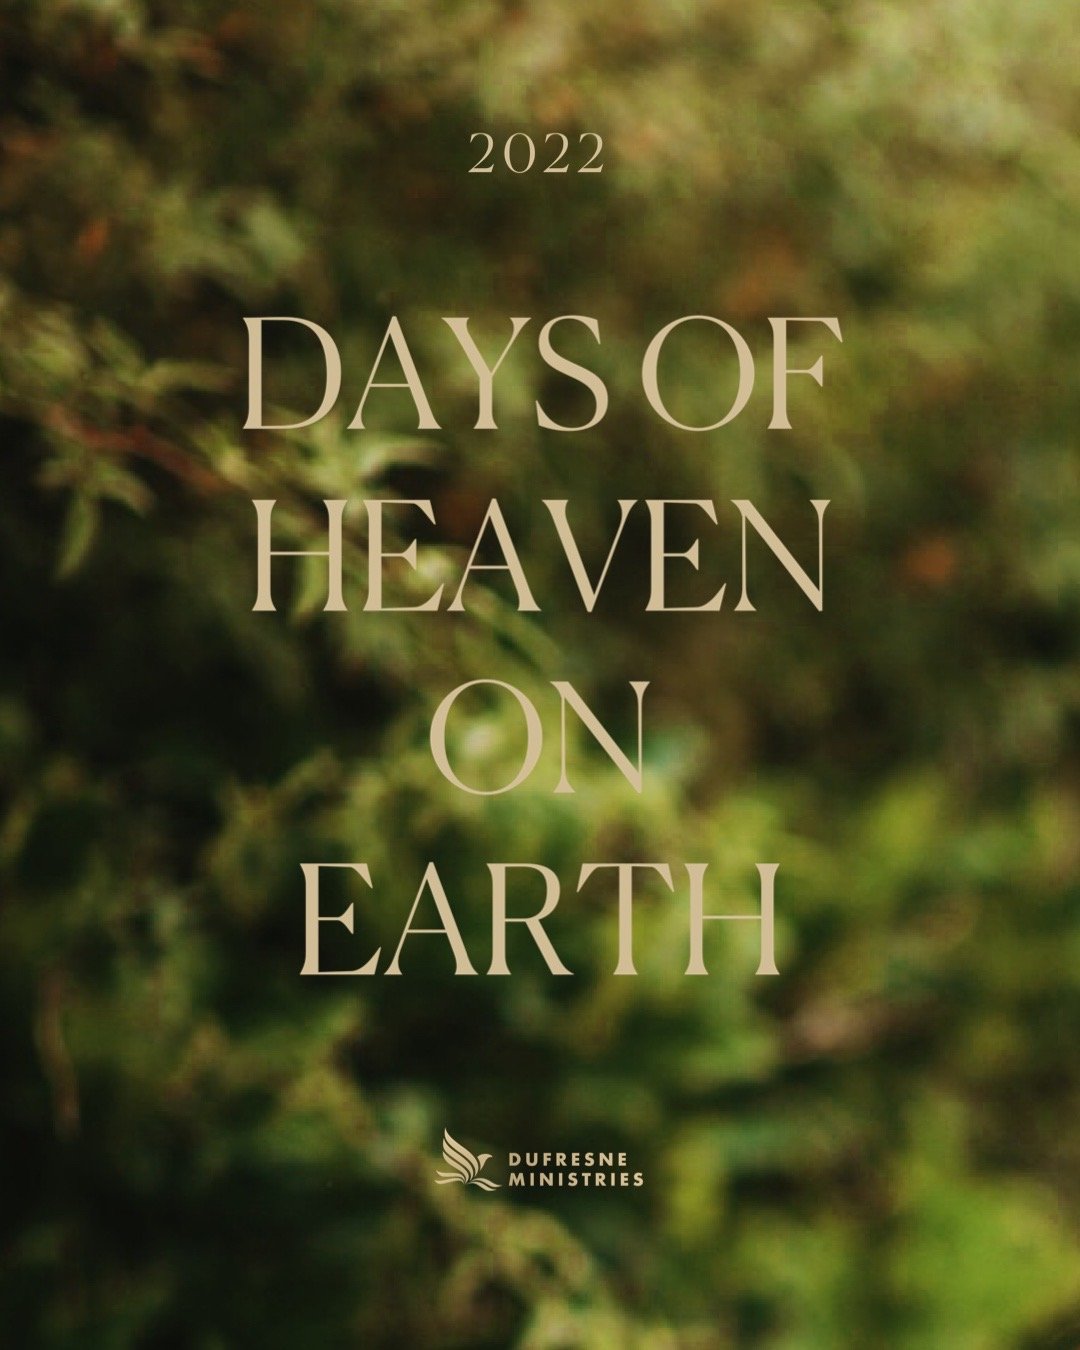 2022: Days of Heaven on Earth by Nancy Dufresne — Dufresne Ministries